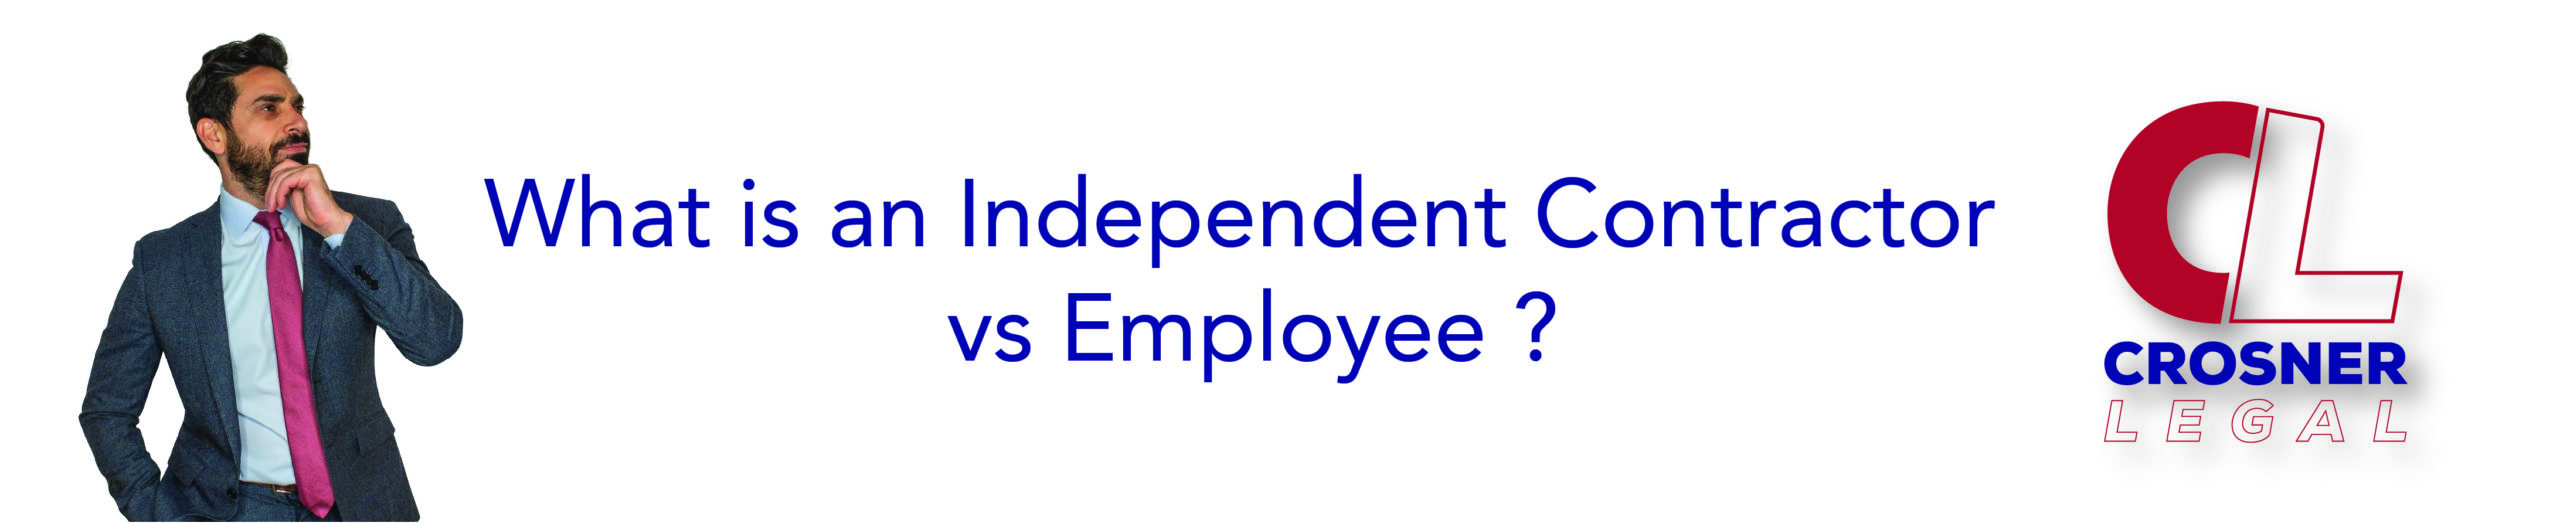 What is an Independent Contractor vs Employee?